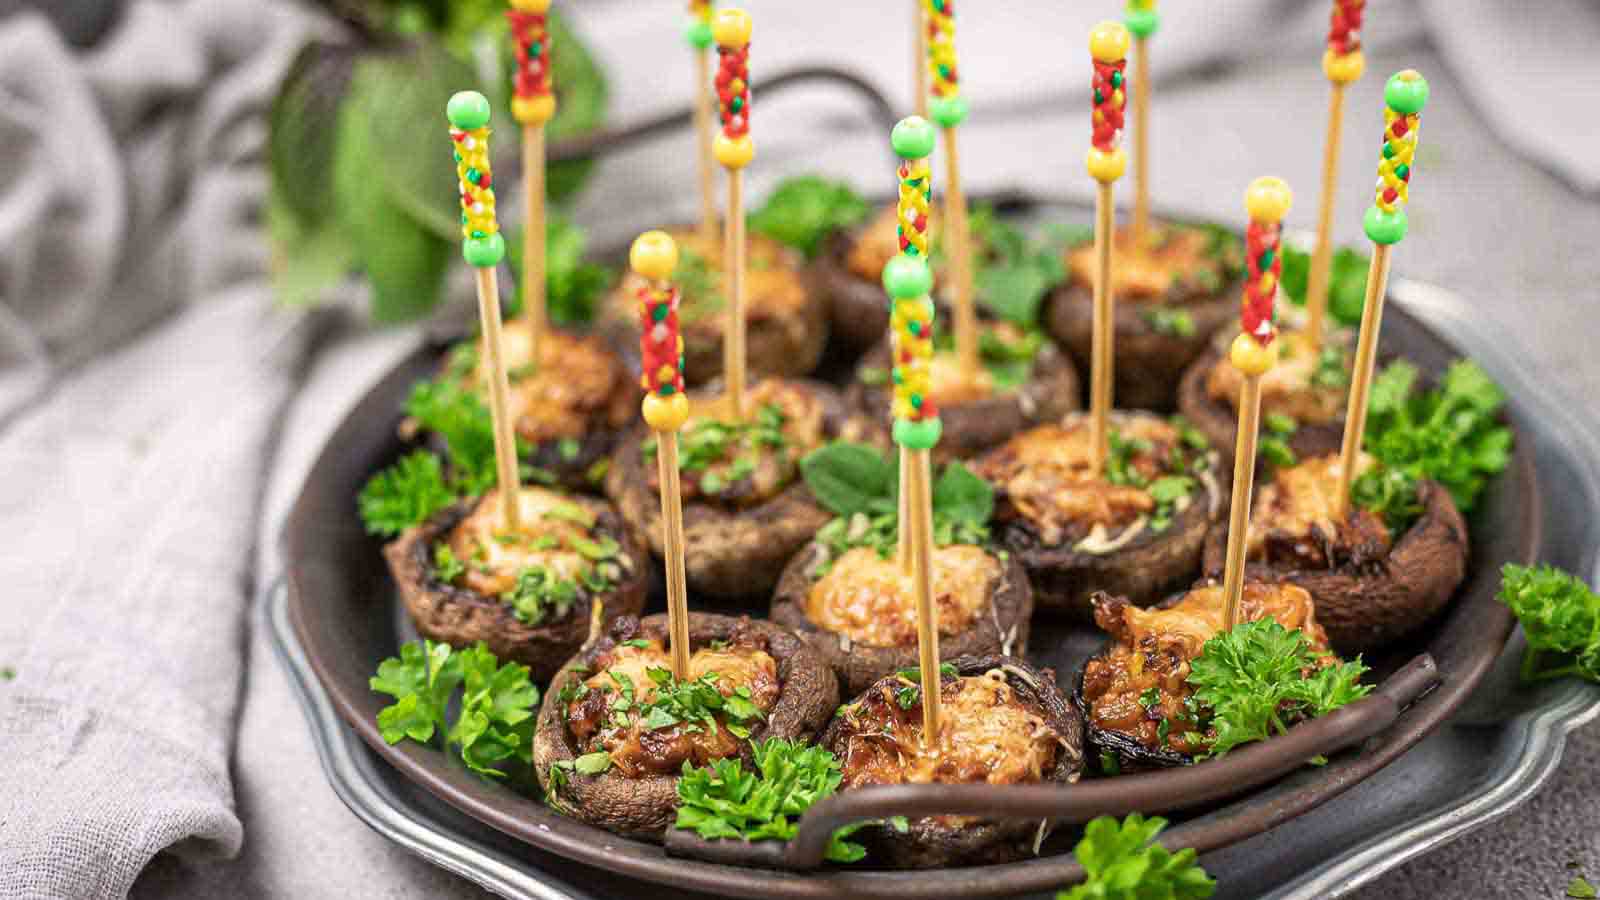 <p>Delight in Stuffed Mushrooms, a flavorful and convenient appetizer that’s equally enjoyable as a dinner option. These mushrooms are thoughtfully stuffed with a delectable mixture, creating a symphony of tastes and textures. Whether you’re starting your meal with these savory bites or enjoying them as the main course, these stuffed mushrooms add a delightful touch to your dinner table.<br><strong>Get the Recipe: </strong><a href="https://www.lowcarb-nocarb.com/keto-stuffed-mushrooms-appetizer/?utm_source=msn&utm_medium=page&utm_campaign=Your%20title%20here:%20it%20should%20be%2055-60%20characters,%20ideally">Stuffed Mushrooms Appetizer</a></p>